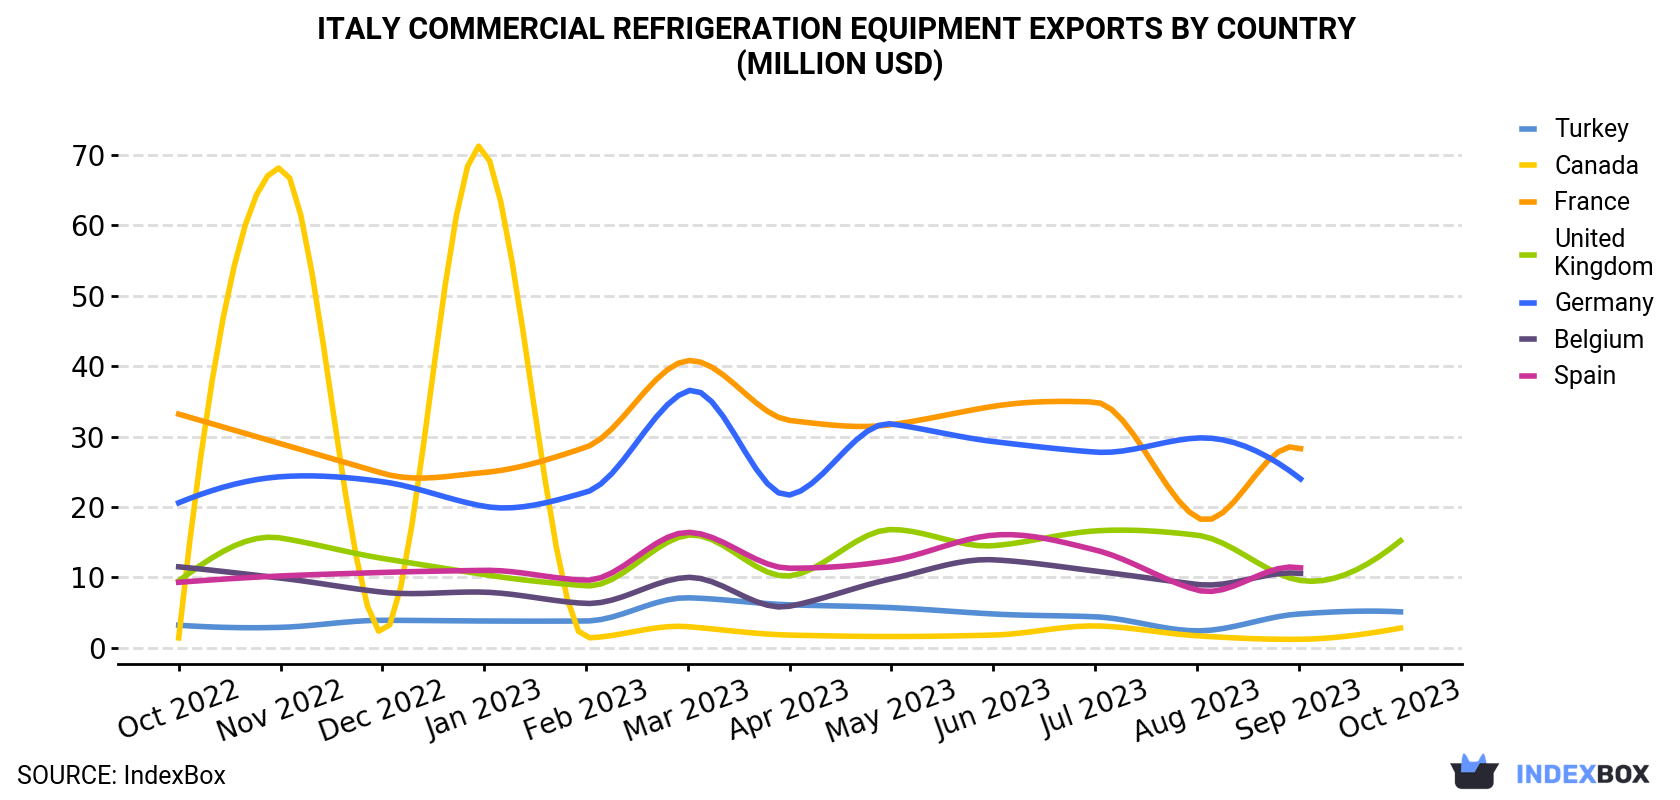 Italy Commercial Refrigeration Equipment Exports By Country (Million USD)